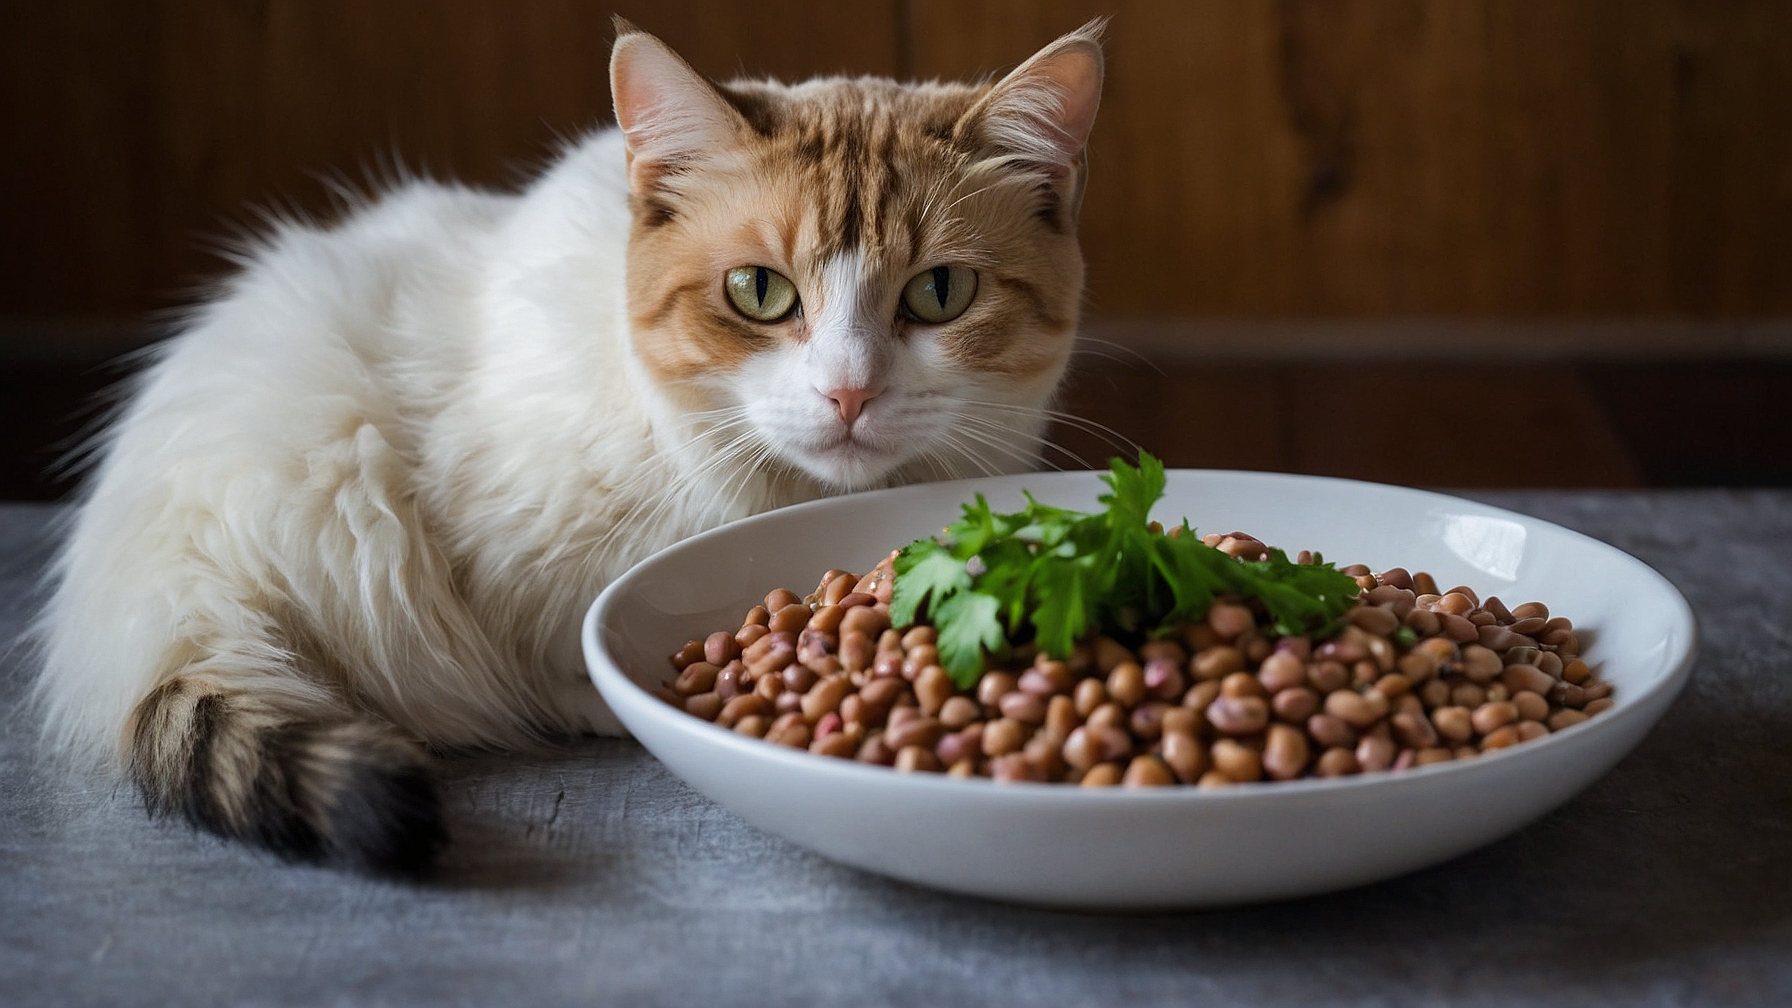 Can Cats Eat Black Eyed Peas